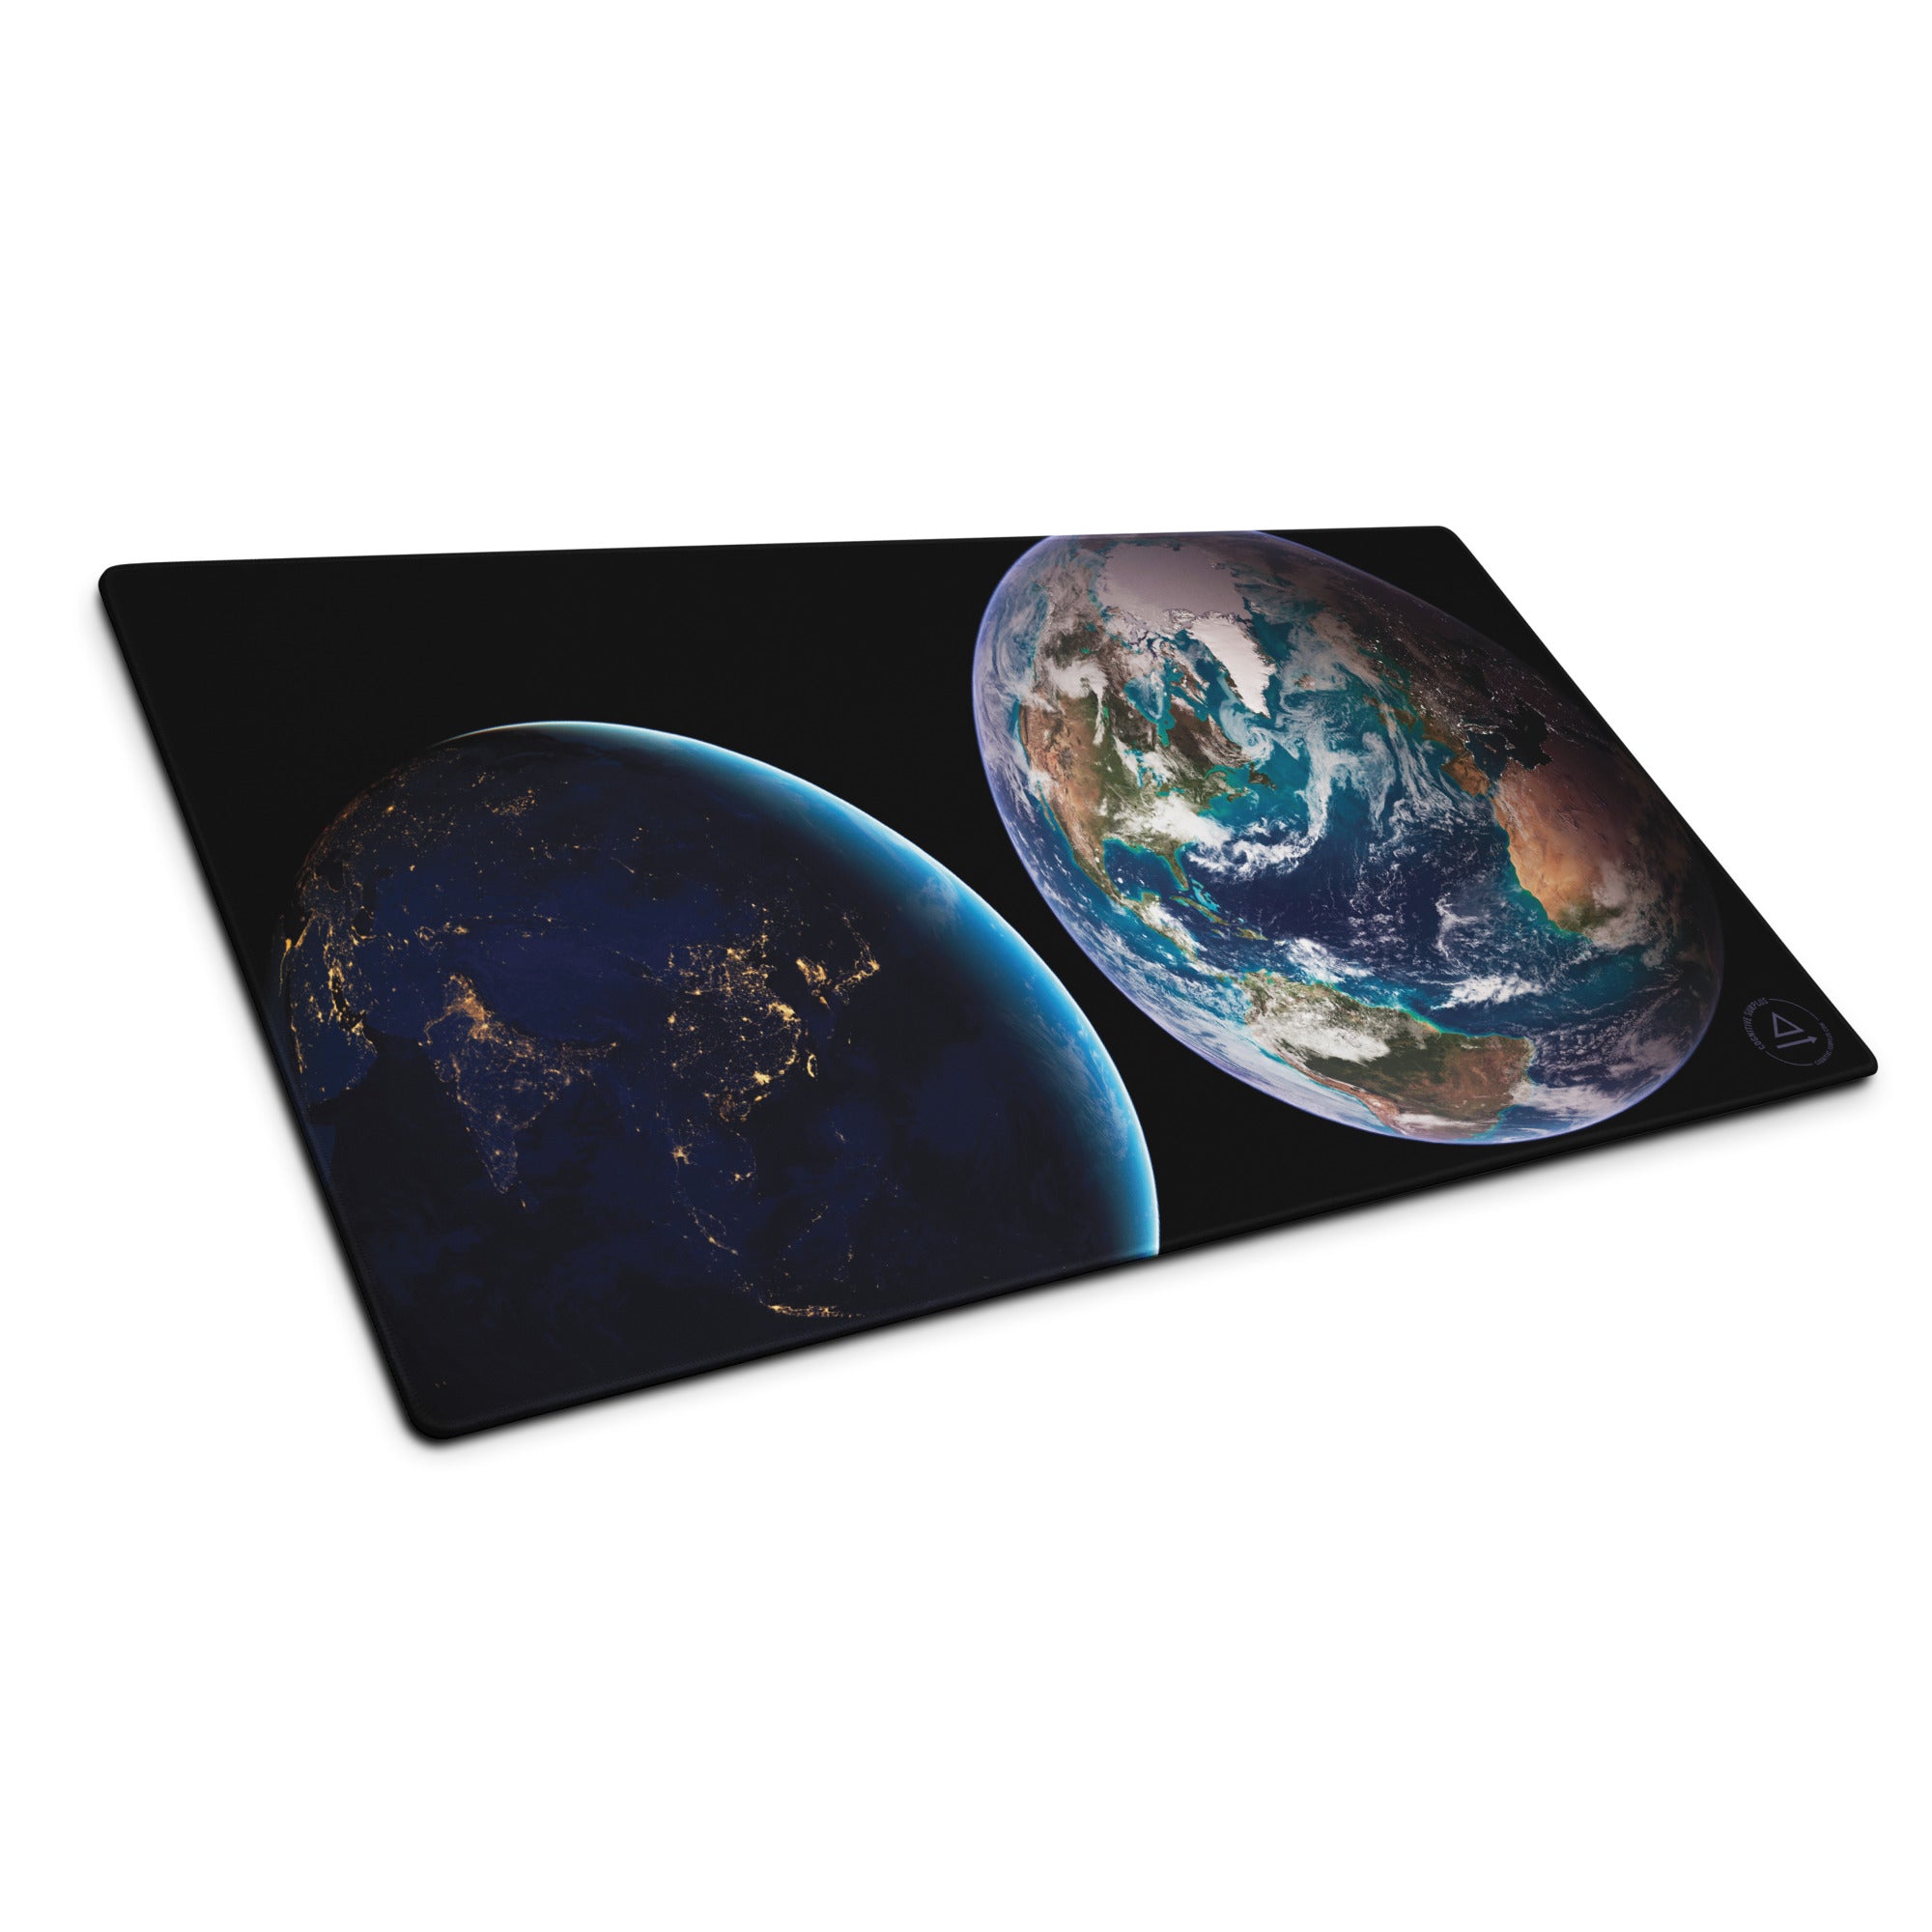 gaming-mouse-pad-white-36x18-front-6595e9828ad82.jpg